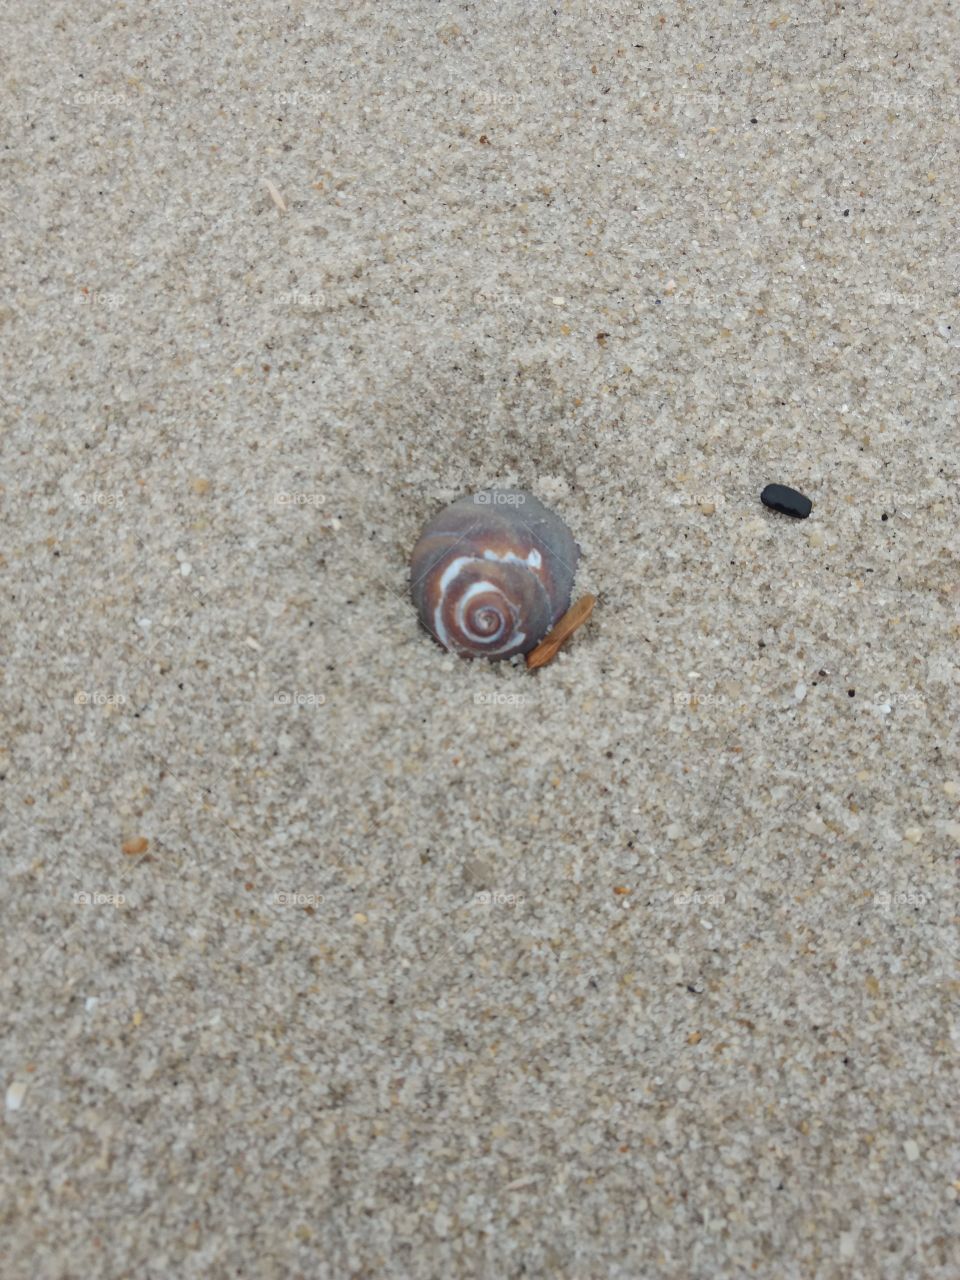 shell in the sand